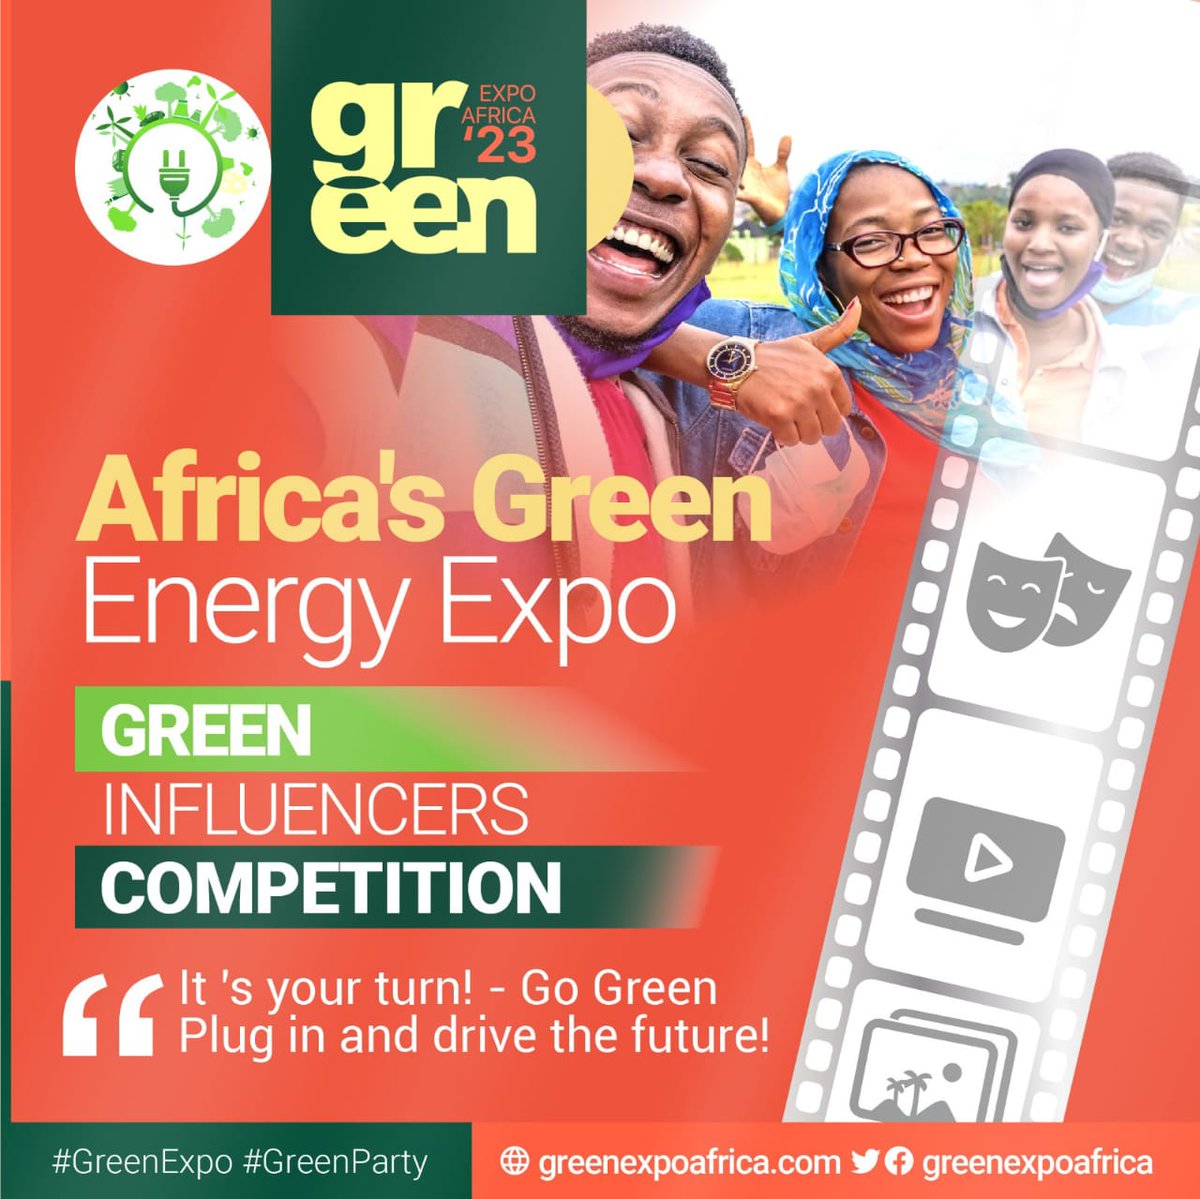 #GreenExpo emphasizes the current and immediate benefits of green solutions, while also highlighting the forward momentum 
and growth of the e-mobility industry and the impact it makes to other industries in the green space.

#GoElectric
#SafariNiElectric
#WRCSafari2023